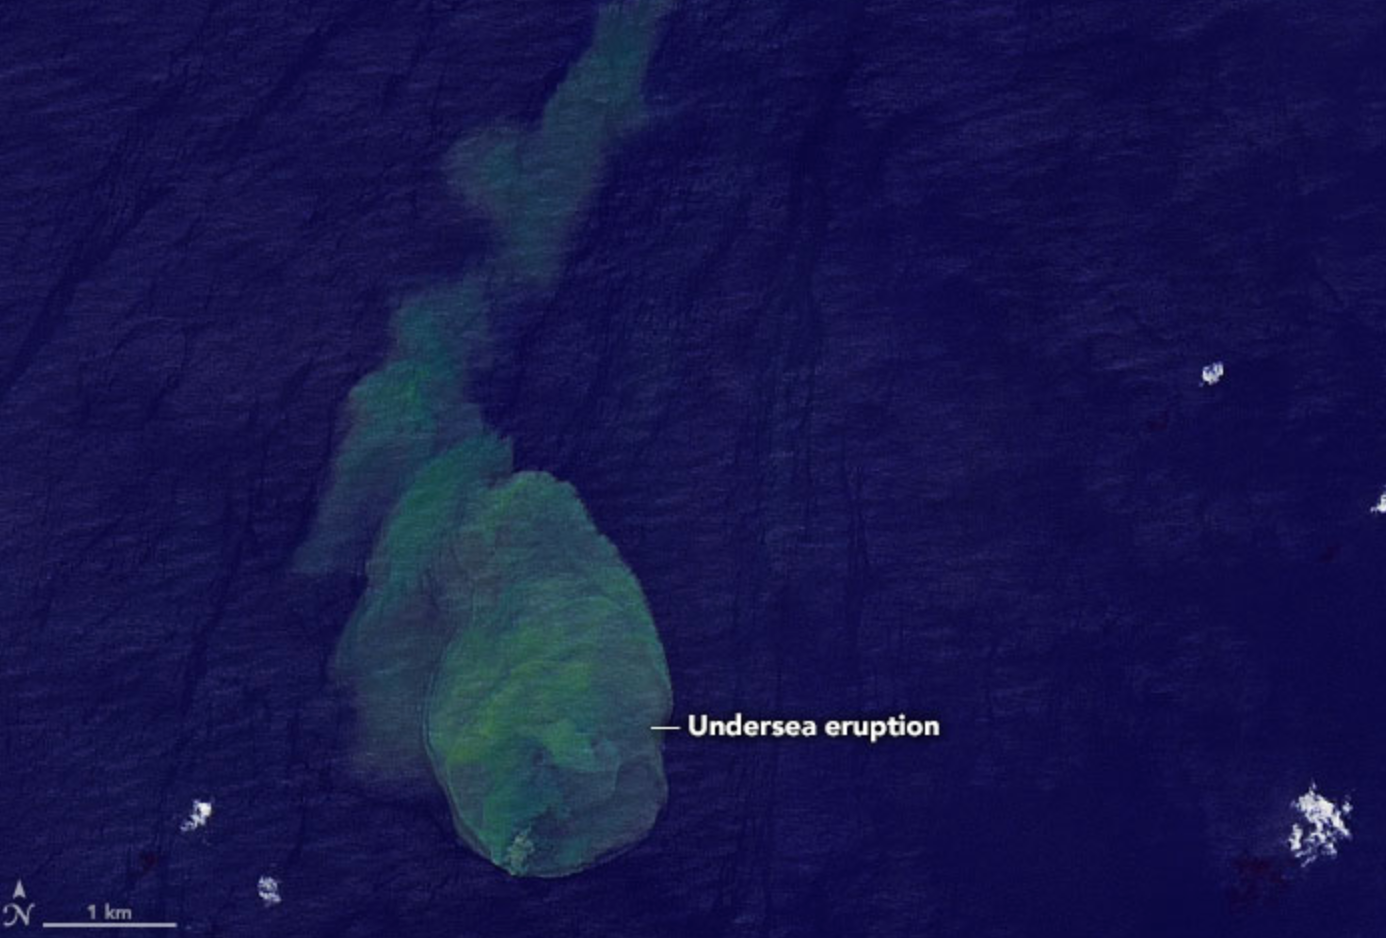 The underwater eruption of a volcano dubbed ‘Shark-cano’ was captured by Nasa satellites in May 2022